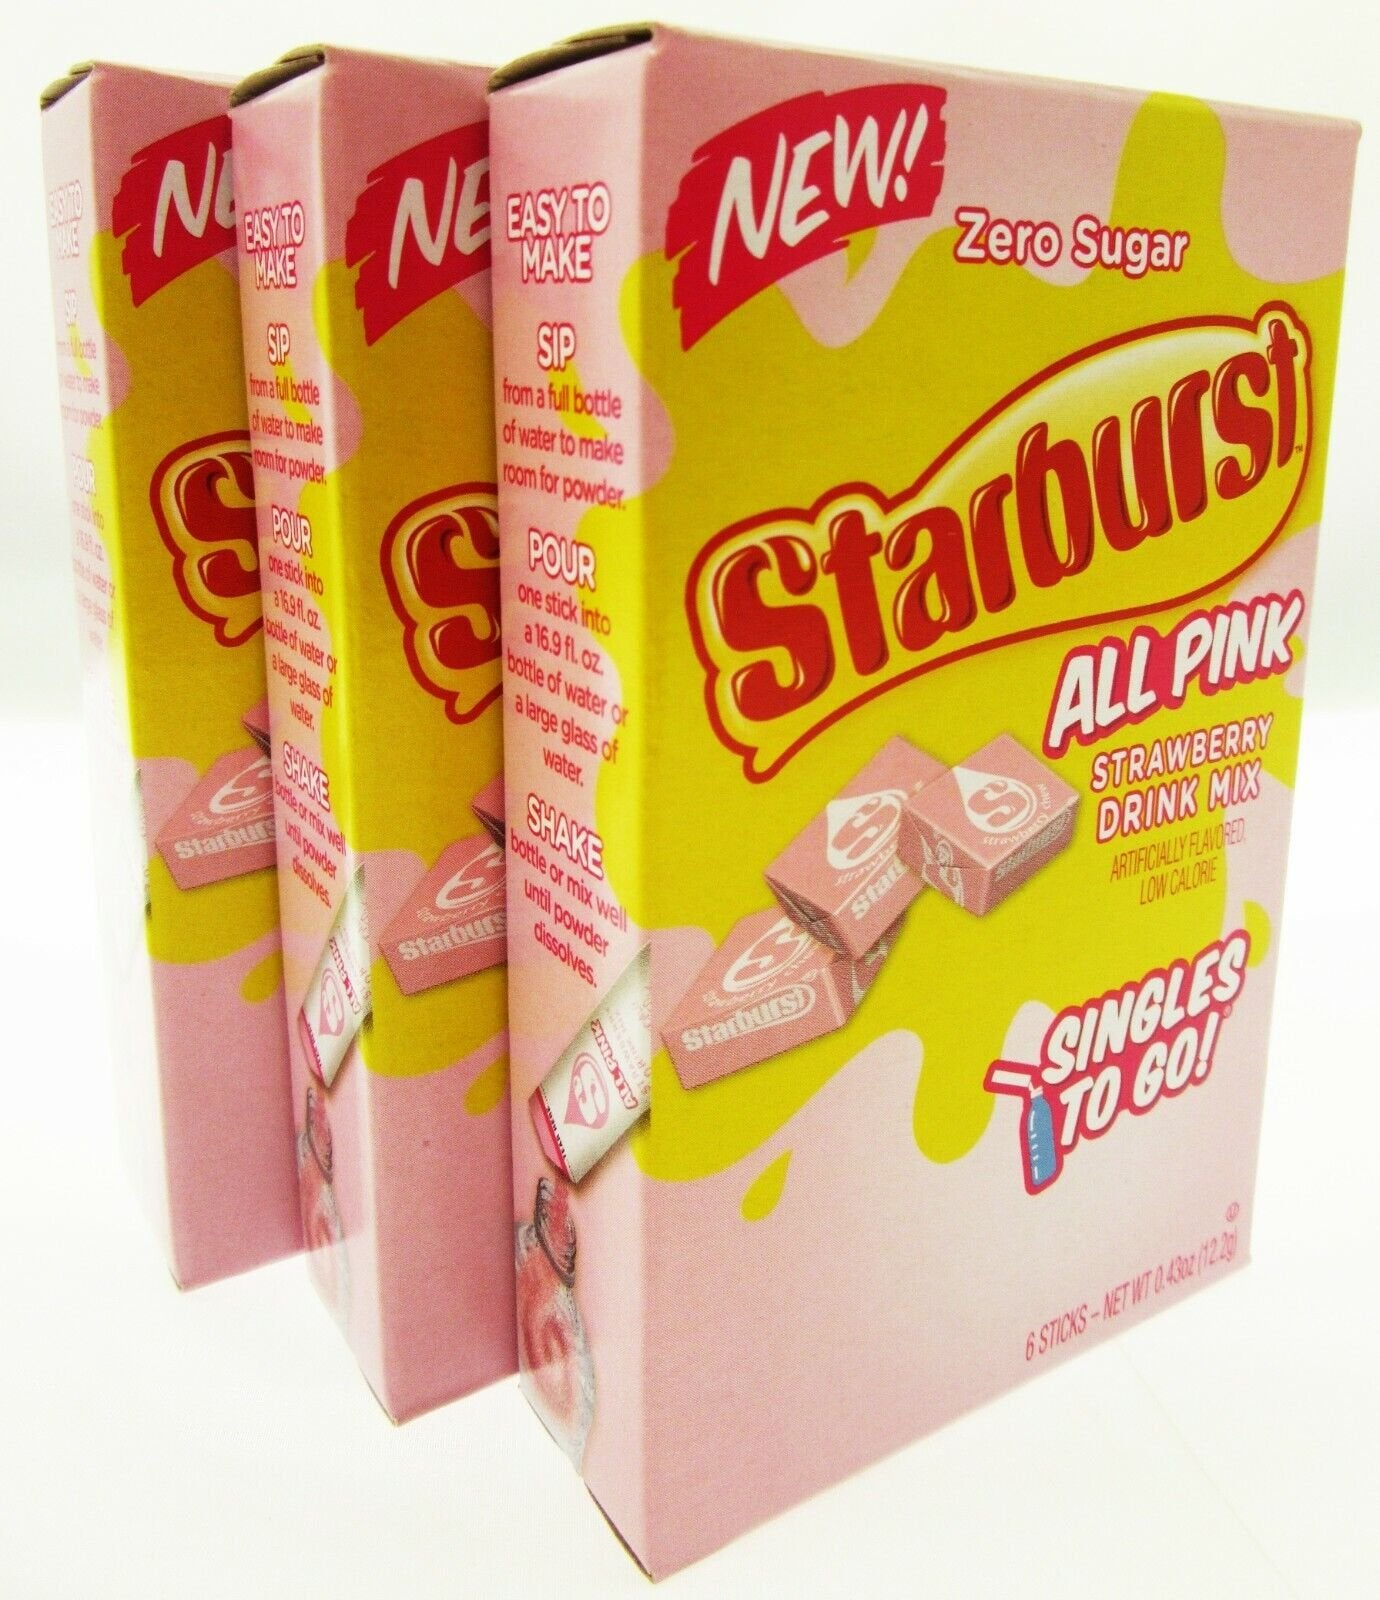 NEW! Starburst All Pink ~ Packets ~ Zero Sugar Free ~ Drink Mix ~ 3 Boxes